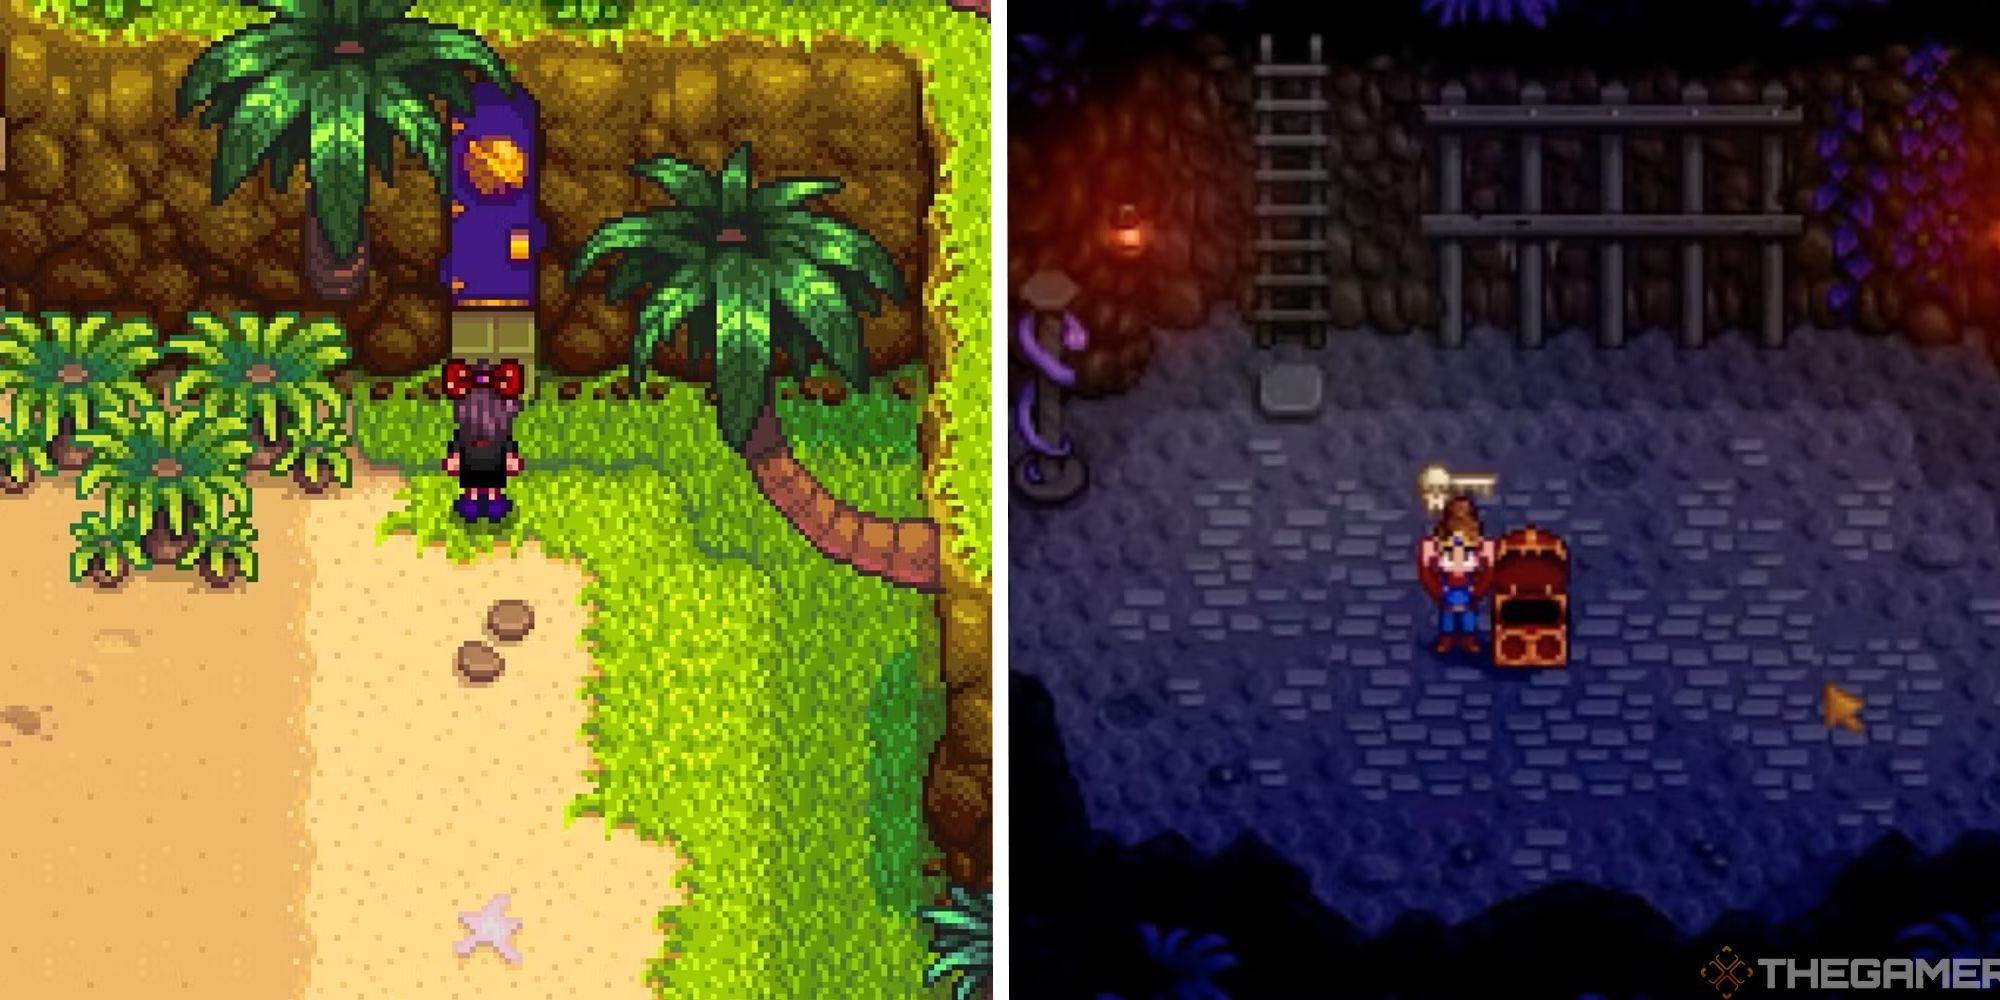 image of player at walnut room next to image of player with skull key